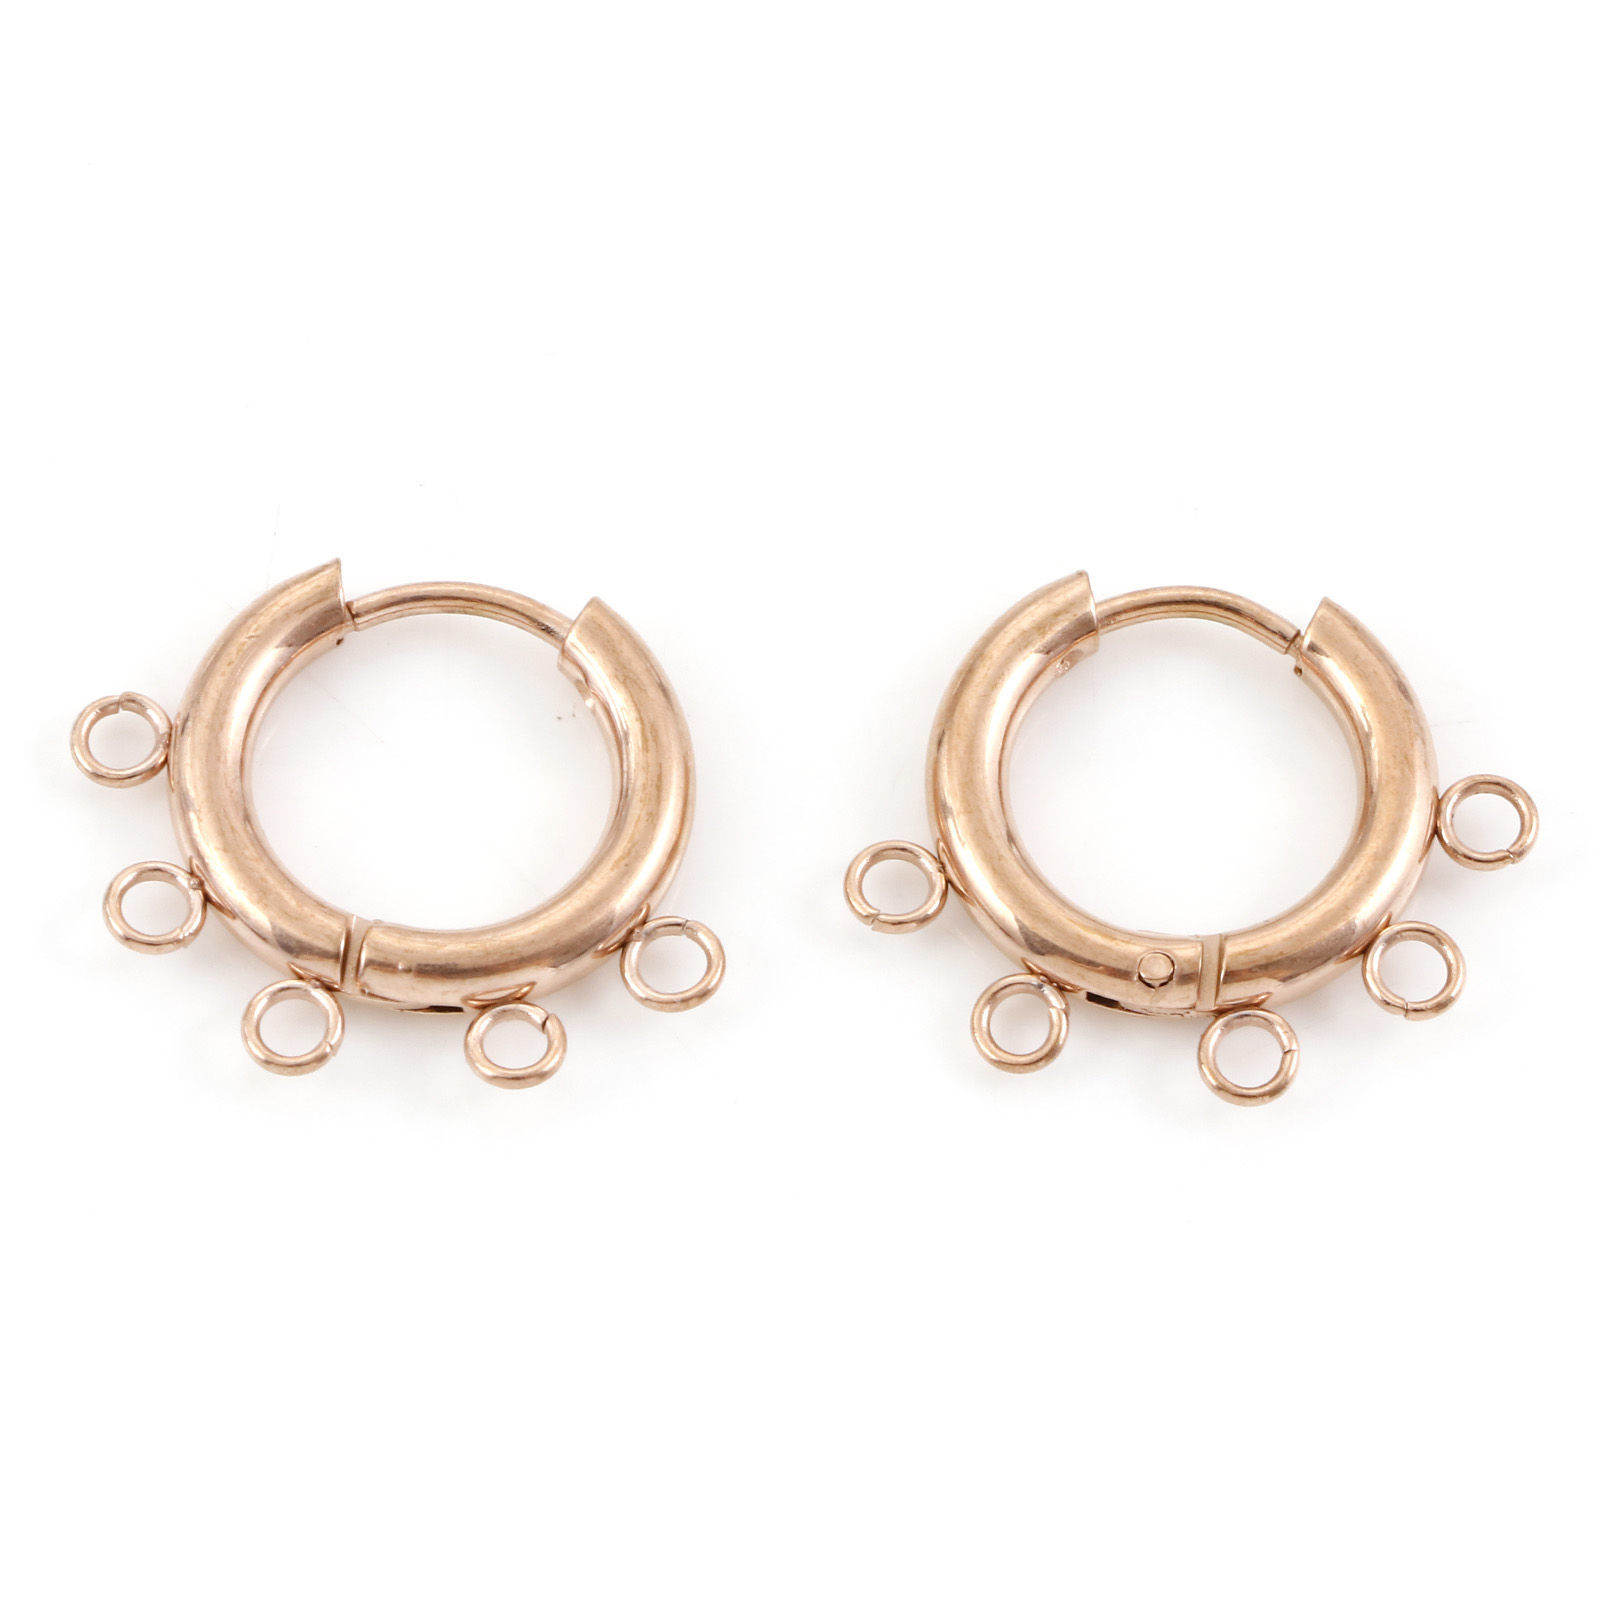 Picture of 304 Stainless Steel Hoop Earrings Round Rose Gold With Loop 20mm x 18mm, Post/ Wire Size: (18 gauge), 1 Pair